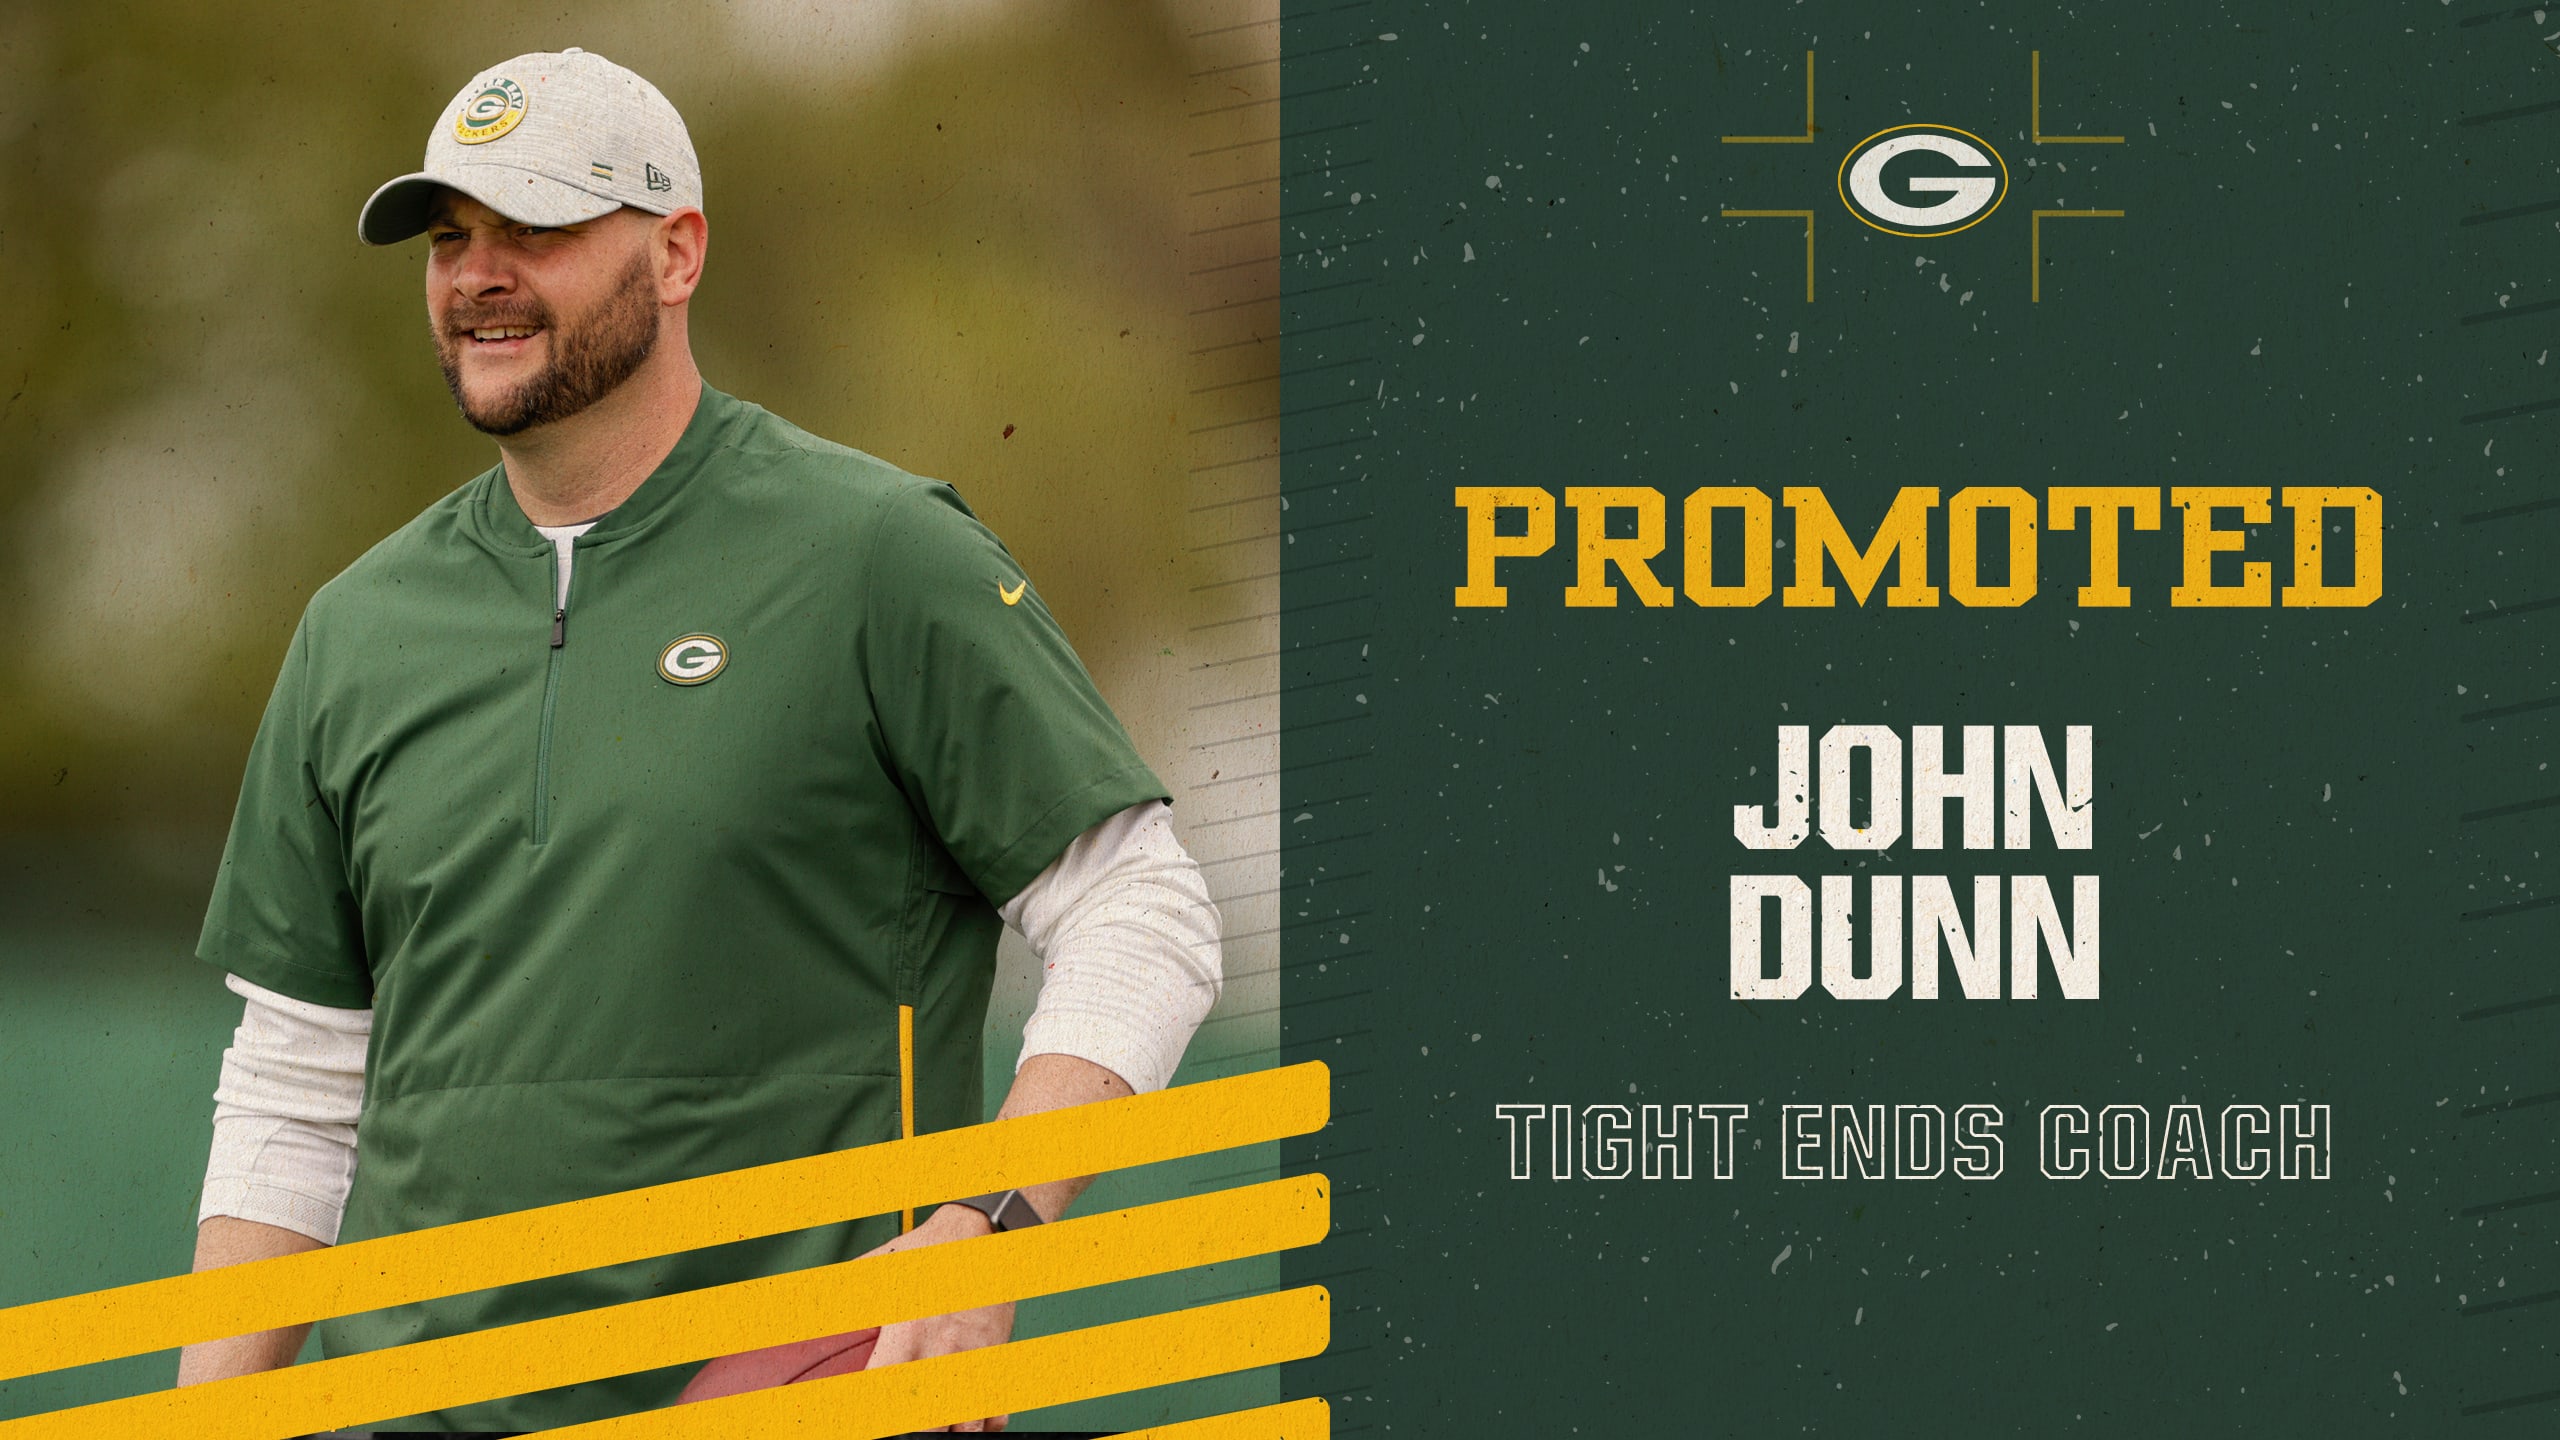 Former UNC Football Player John Dunn Named Green Bay Packers Tight Ends Coach